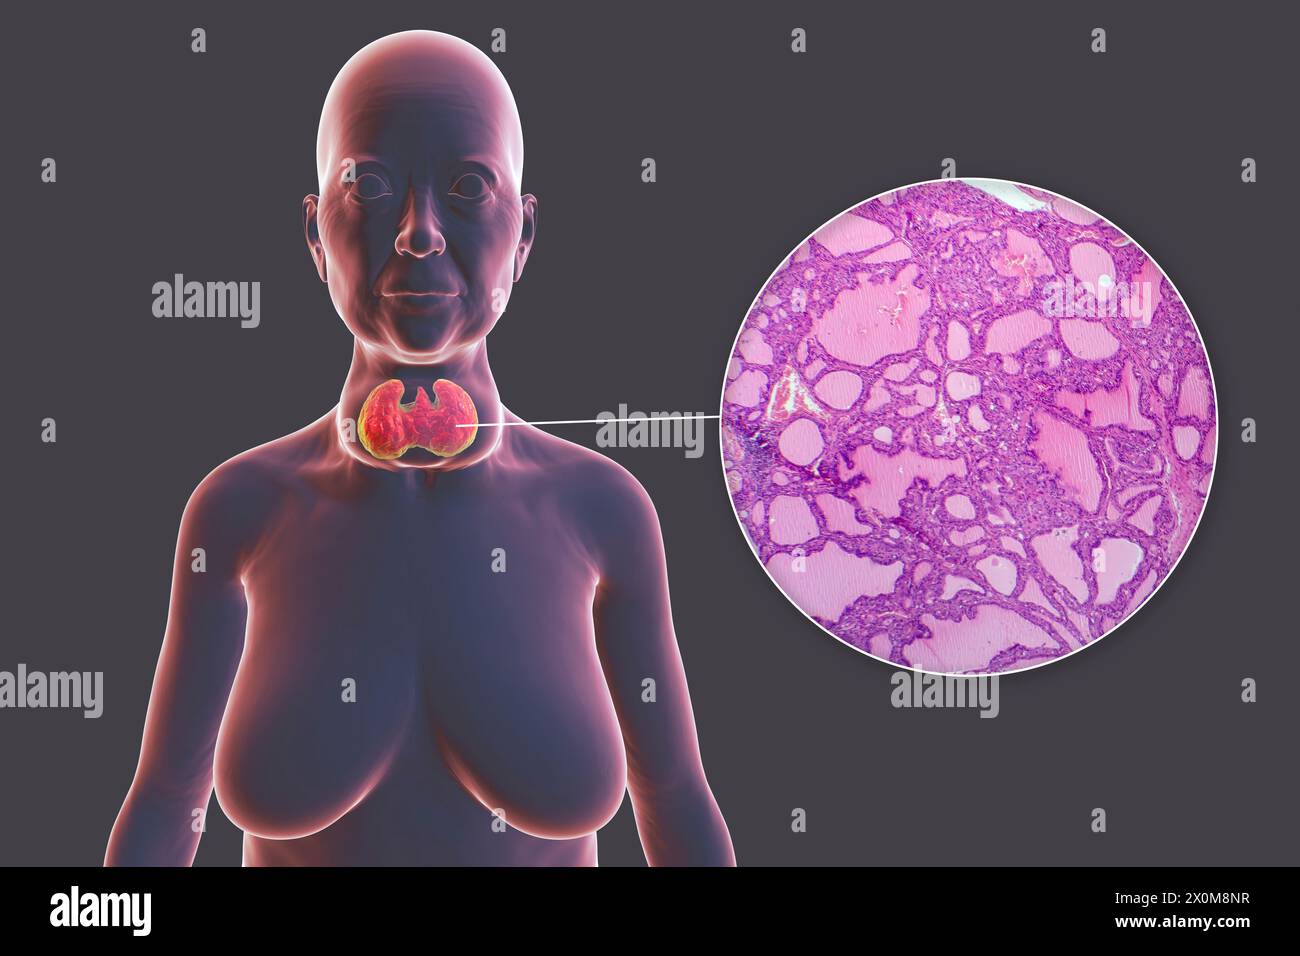 3D illustration of a person with a toxic goitre (enlarged thyroid gland, base of neck), and a close-up of the affected thyroid tissue. A goitre is deemed toxic when the enlarged thyroid gland is also producing excessive thyroid hormone. Stock Photo